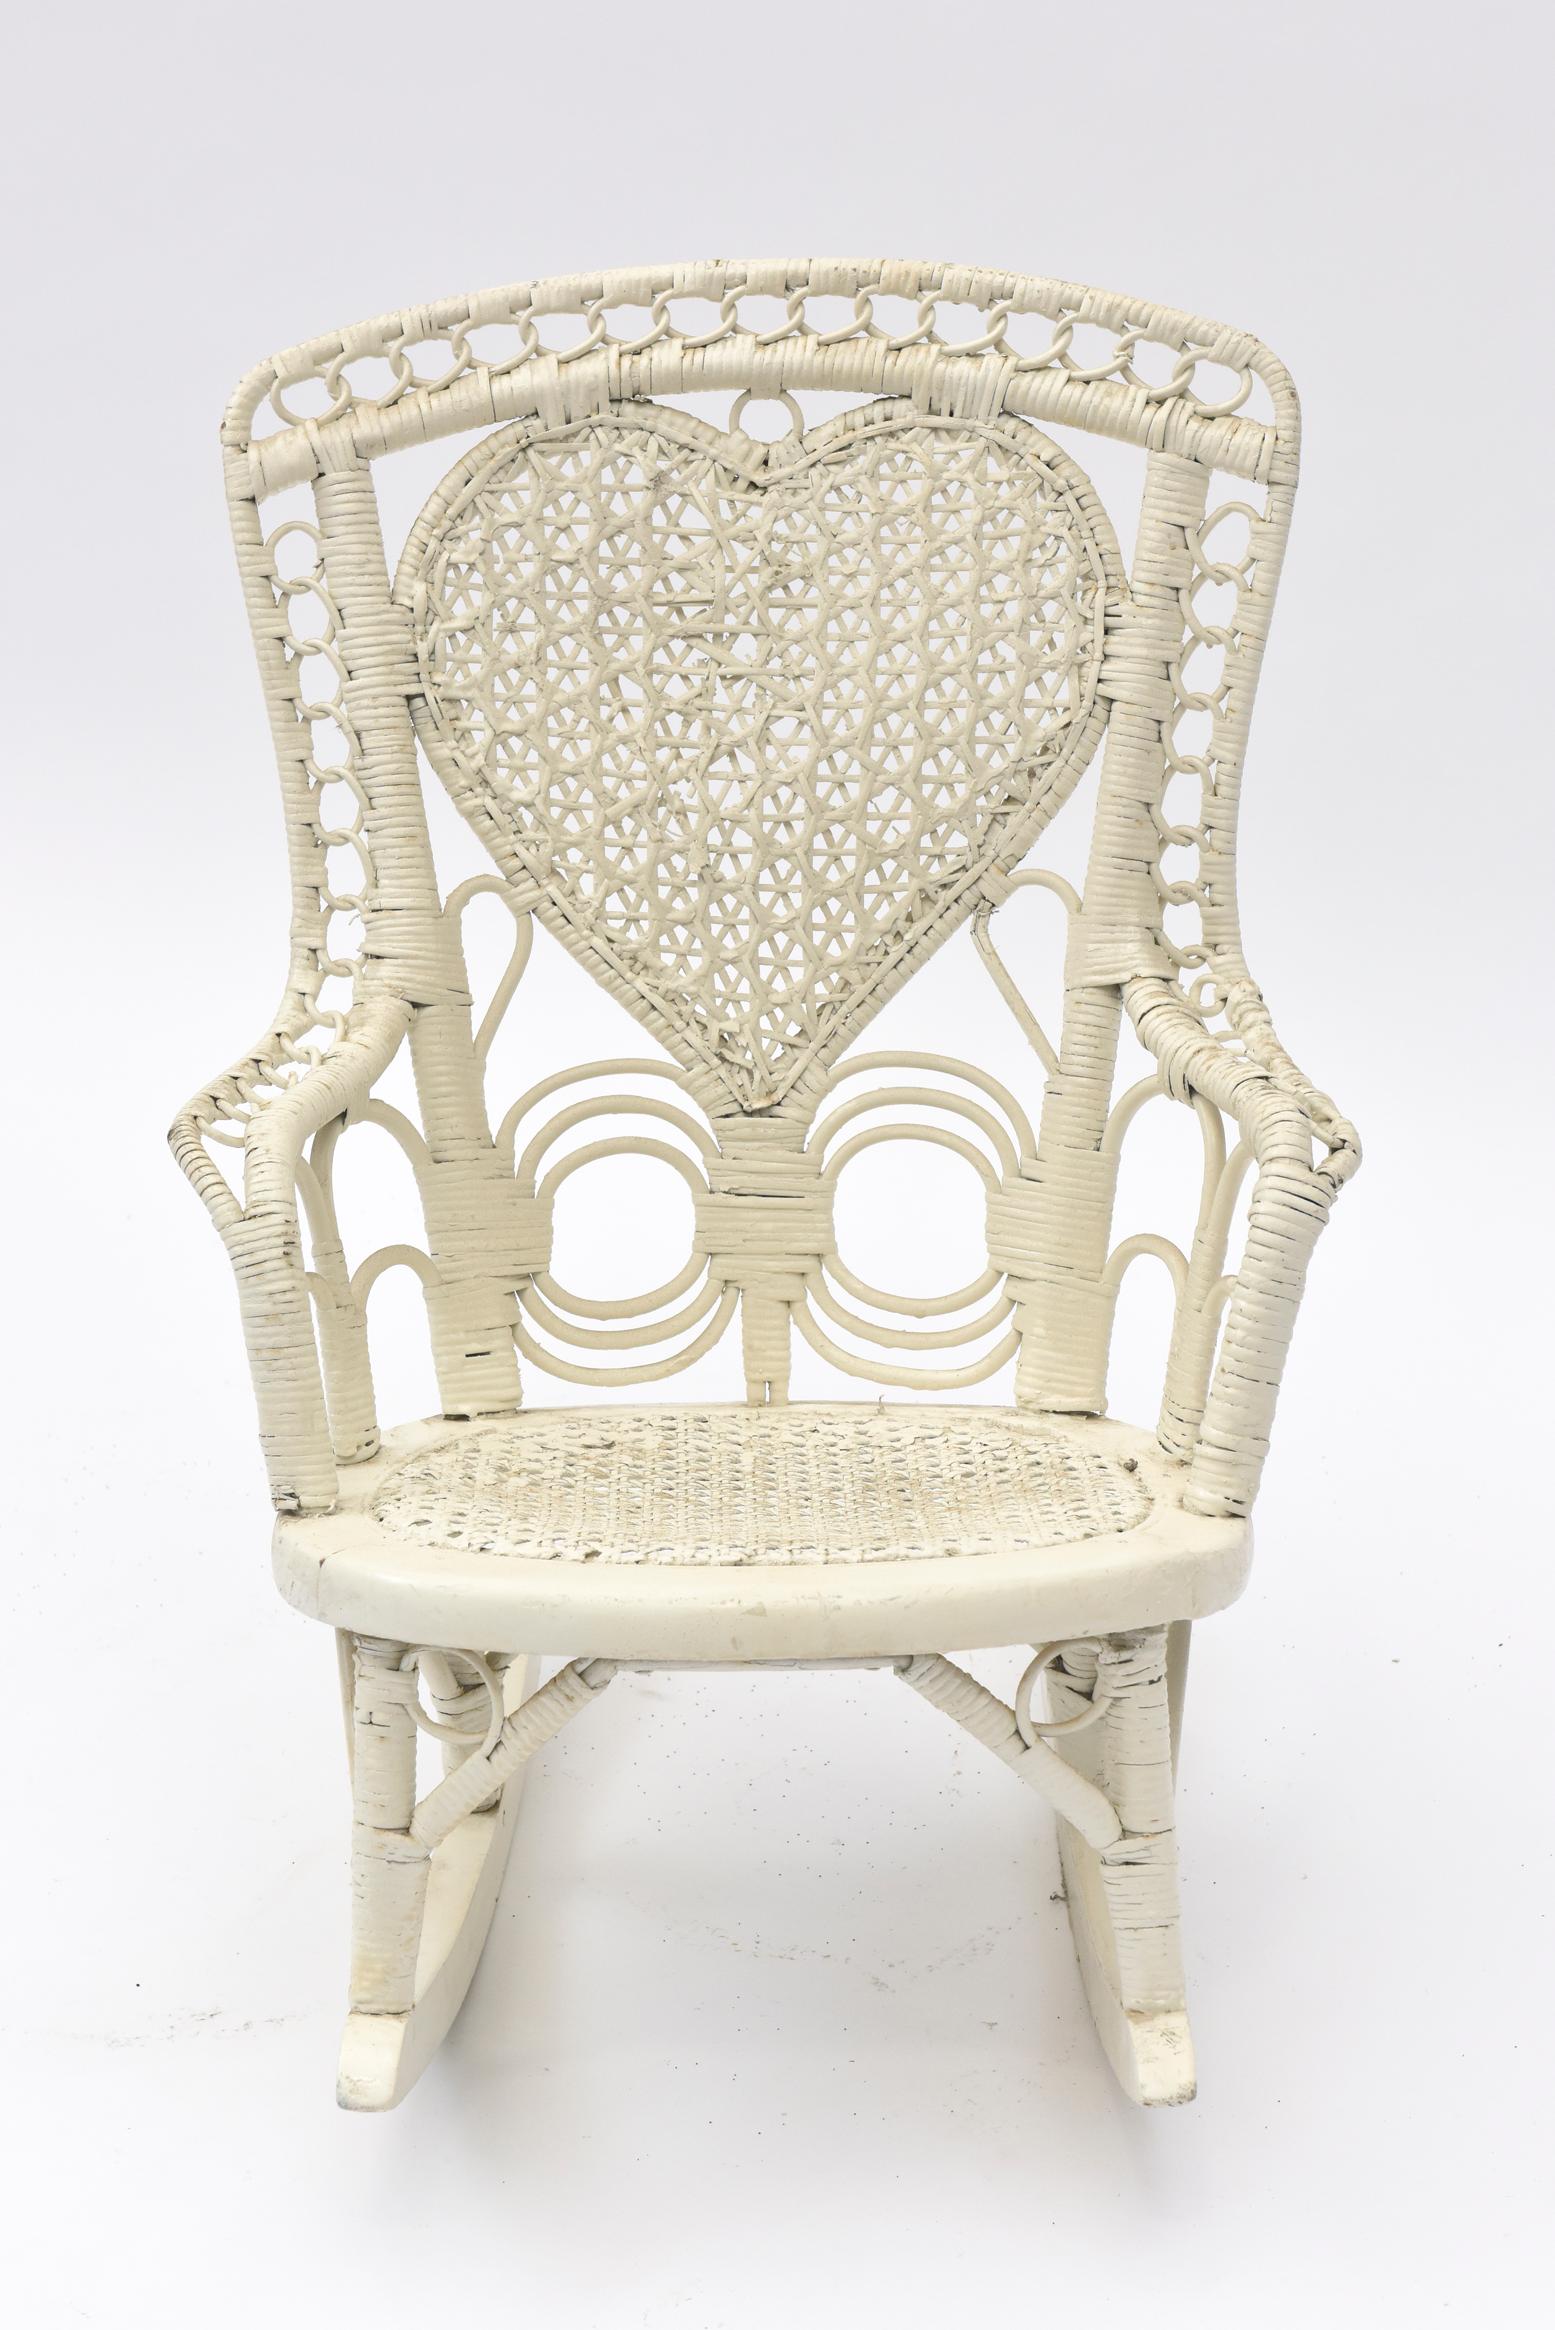 A fine example of spider woven wicker, this early Victorian wicker chair is a charmer. It has a cane seat and interwoven circles going up the arms and across the top of the back. This delightful child's rocking chair would be a perfect addition to a